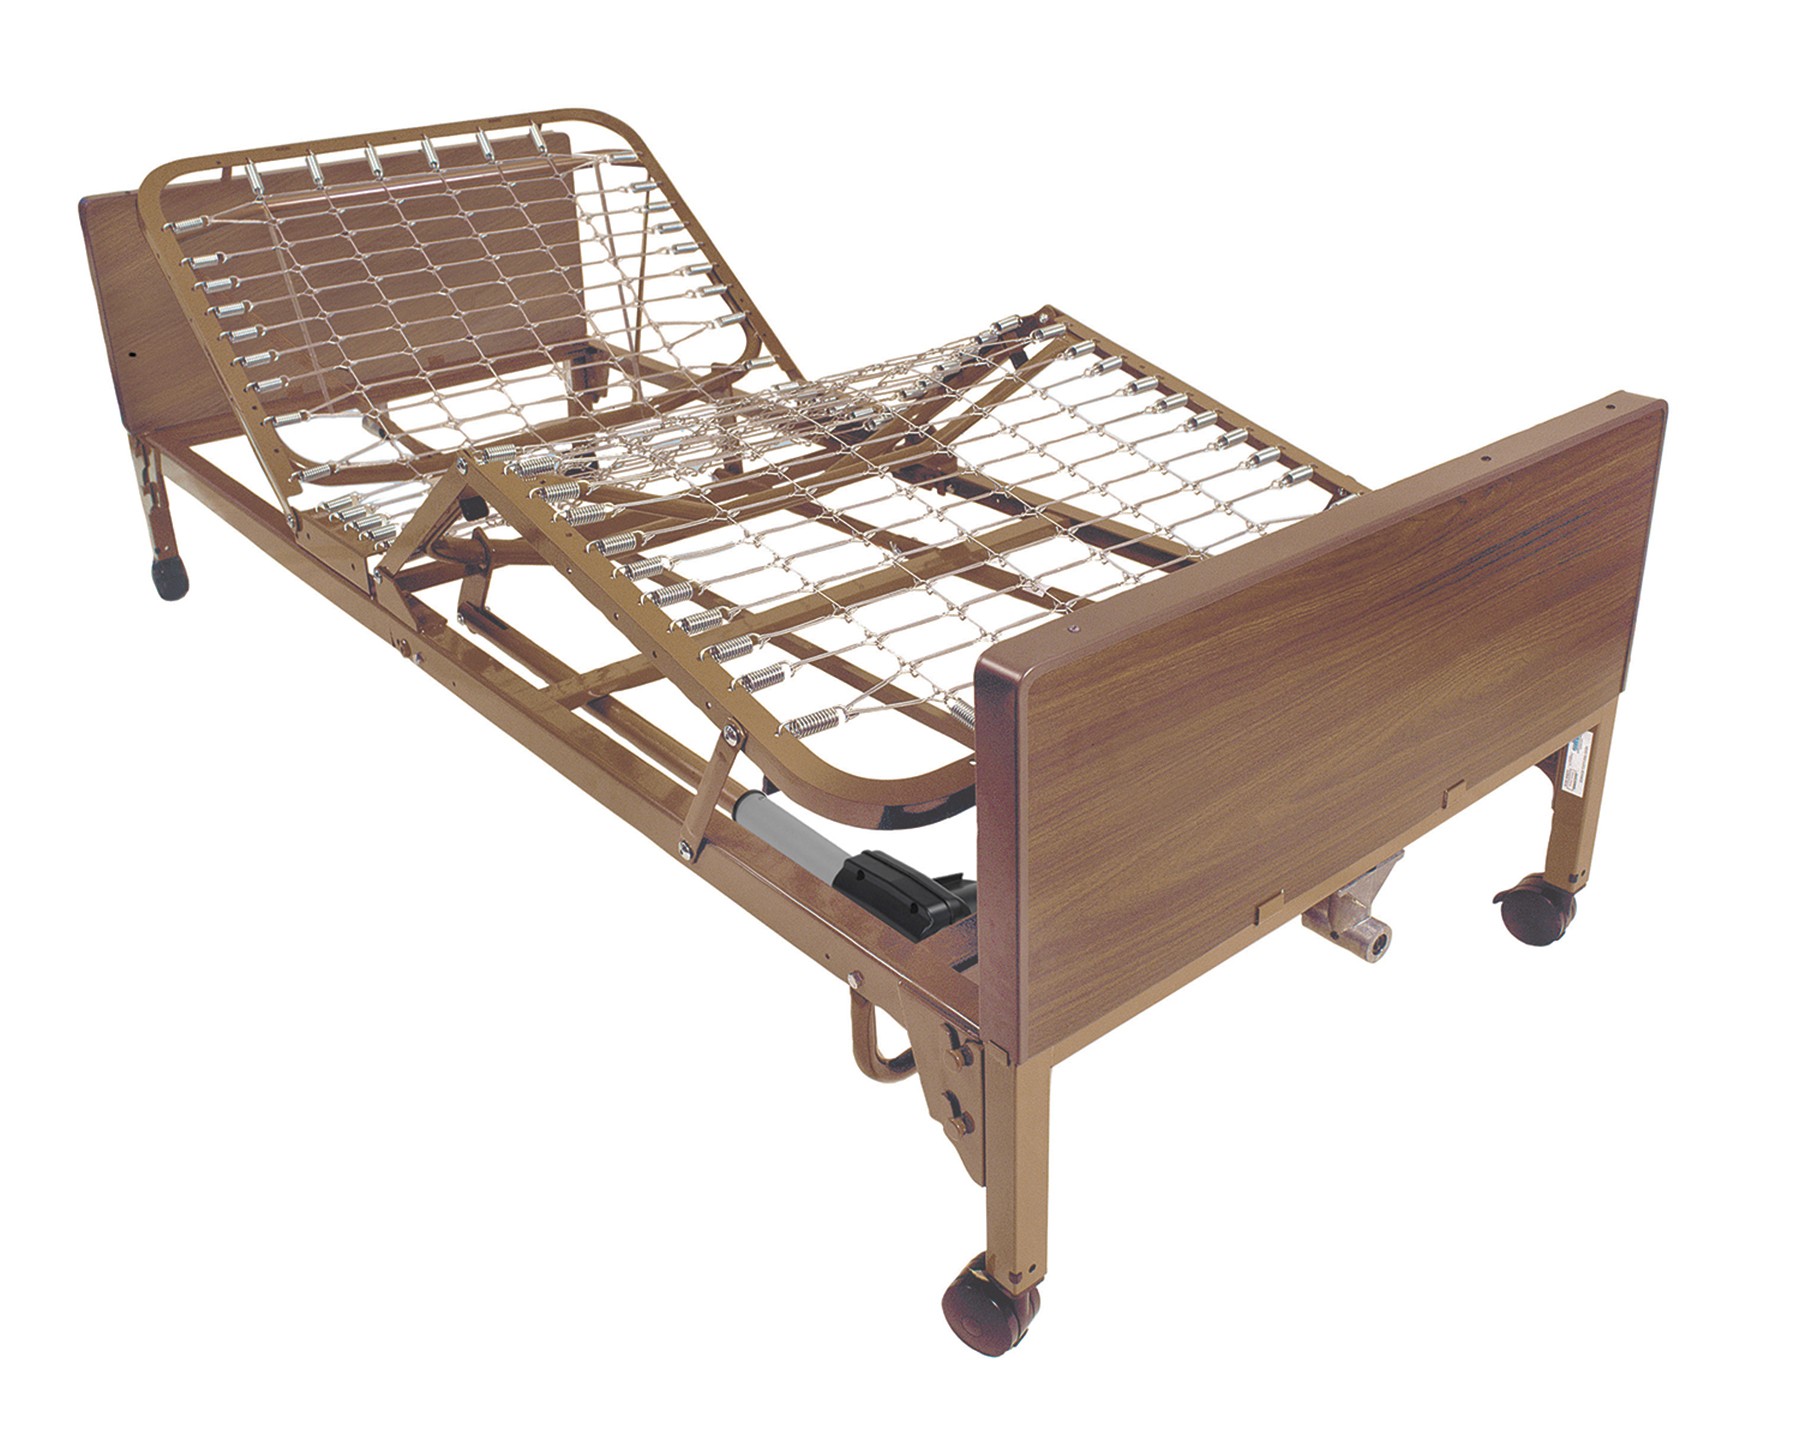 Fulllerton inexpensive Electric Hospital Beds cheap discount sale price